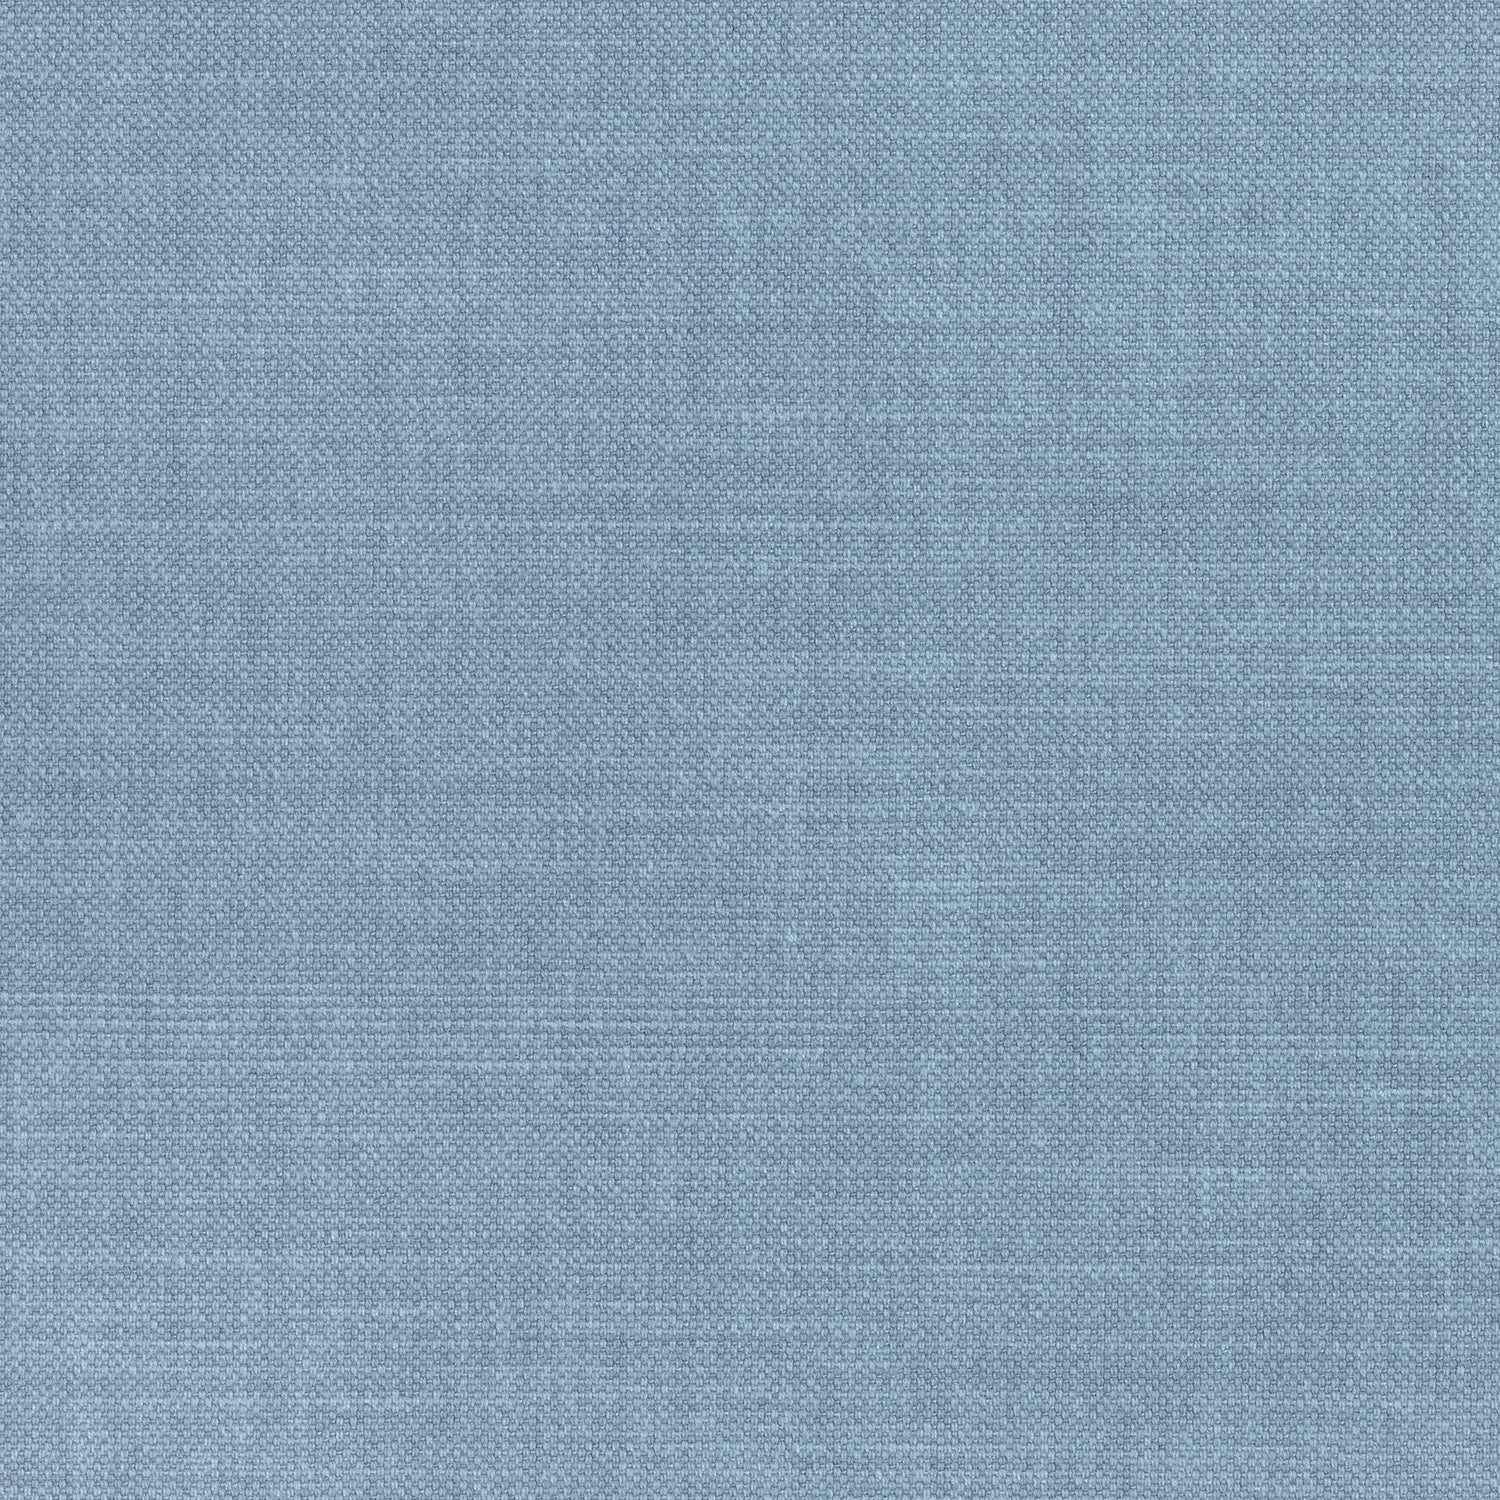 Prisma fabric in denim color - pattern number W70158 - by Thibaut in the Woven Resource Vol 12 Prisma Fabrics collection